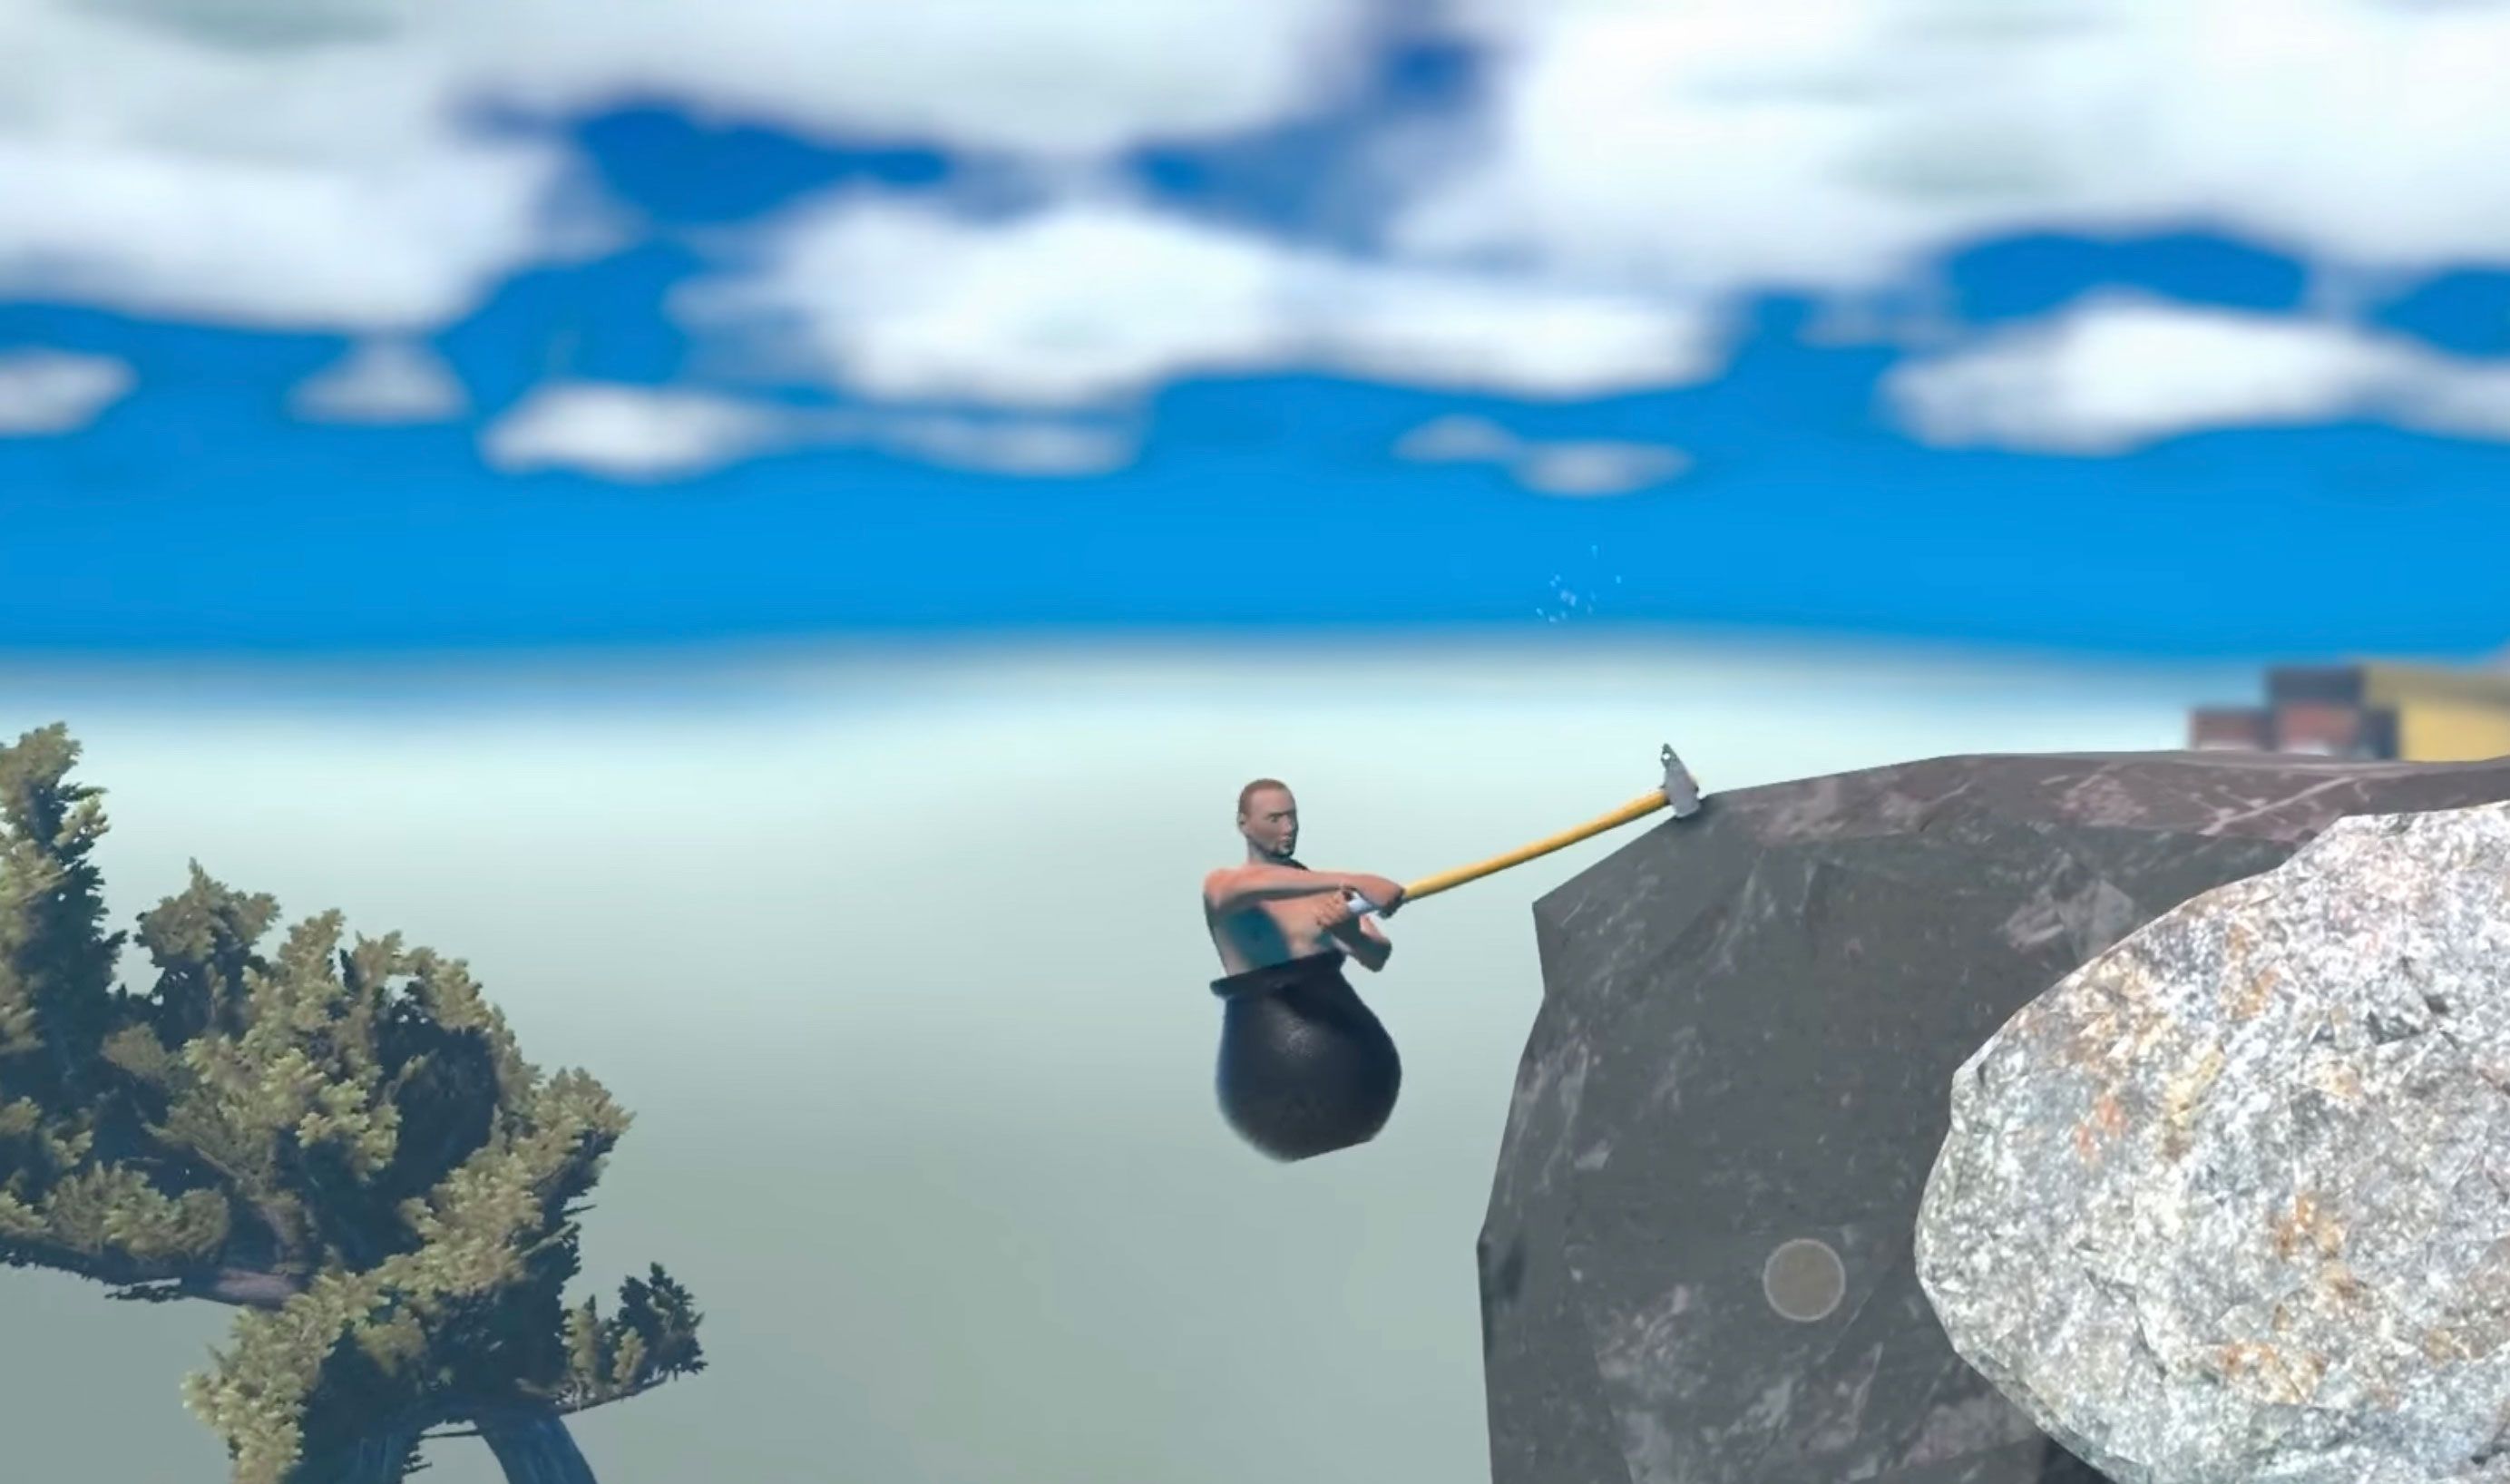 Getting Over It Review - A Masterpiece of Frustration